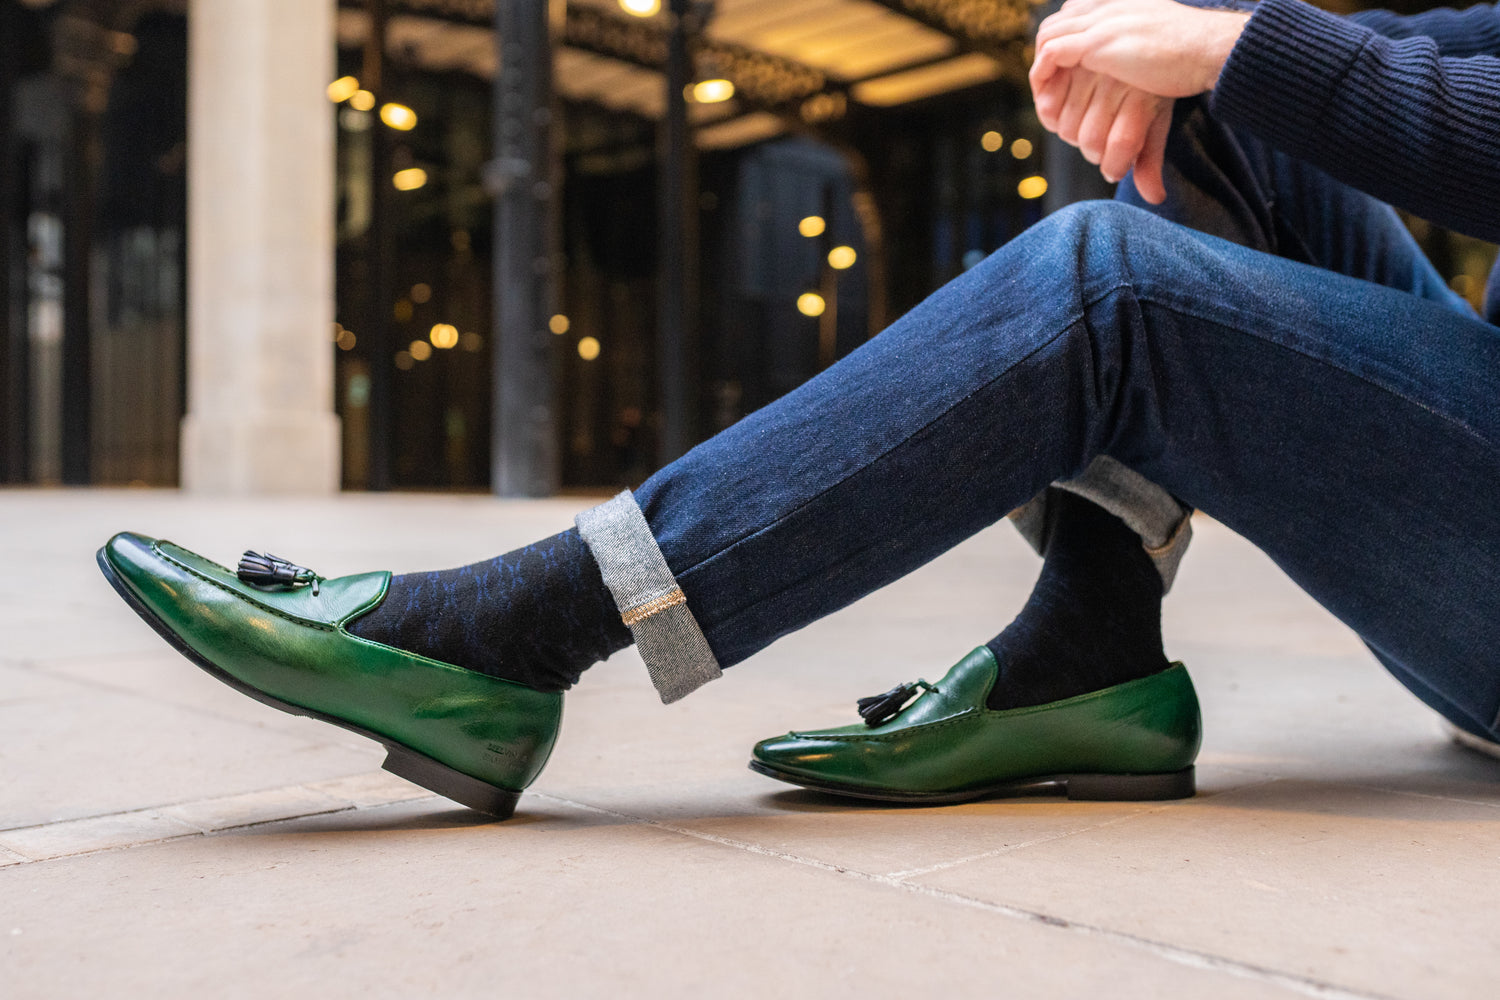 How To Style Men's Colourful Socks!